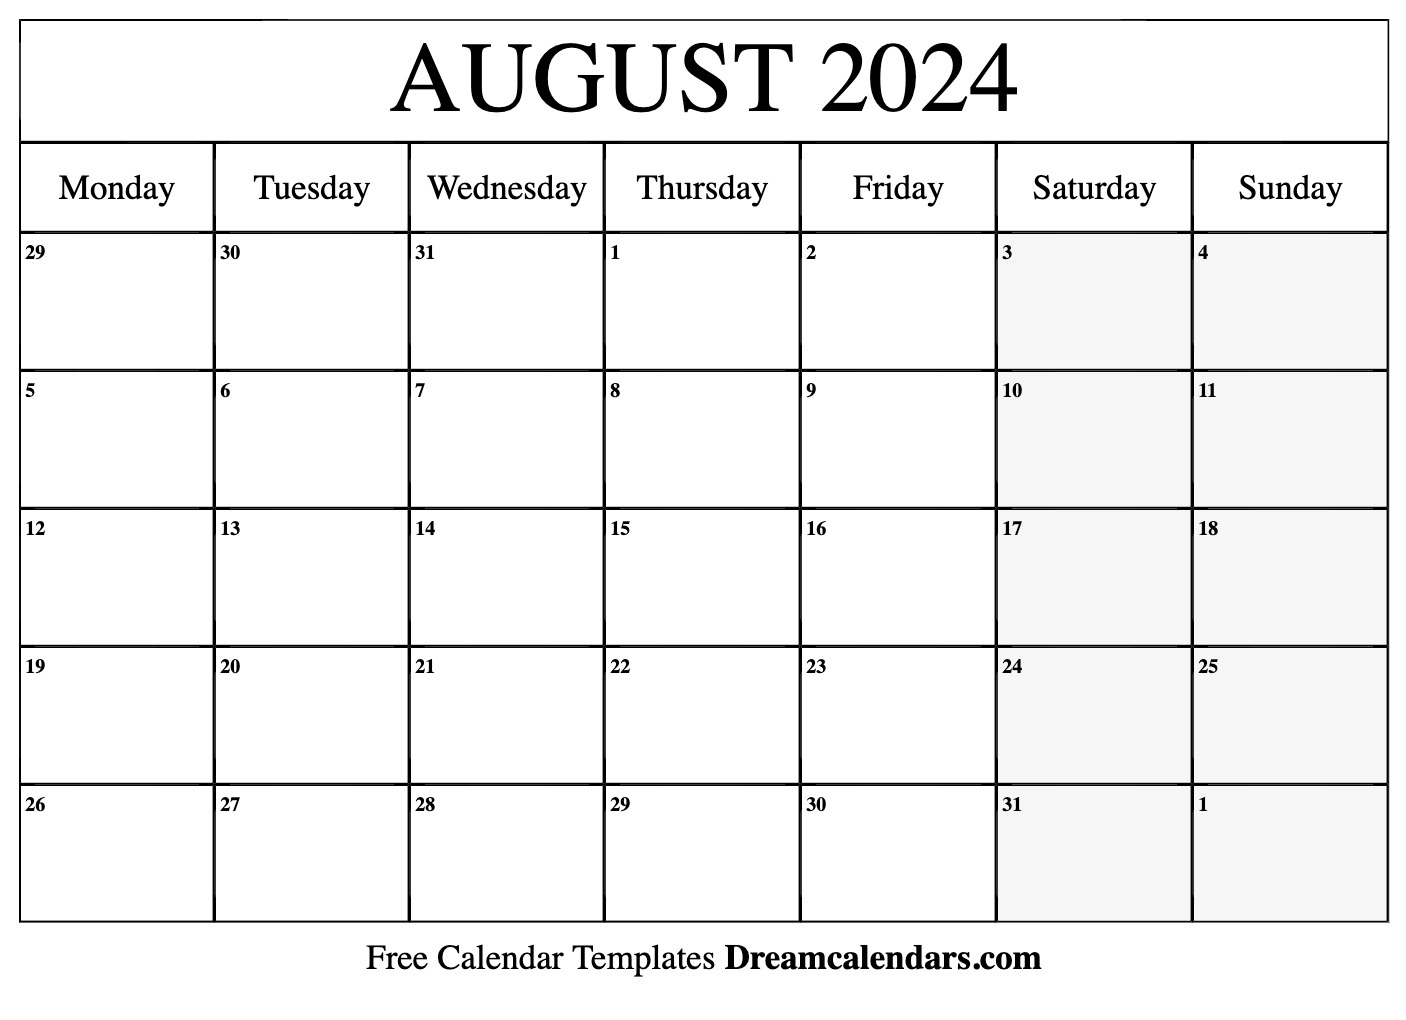 August 2024 Calendar | Free Blank Printable With Holidays inside Free Printable August 2024 Calendar Word